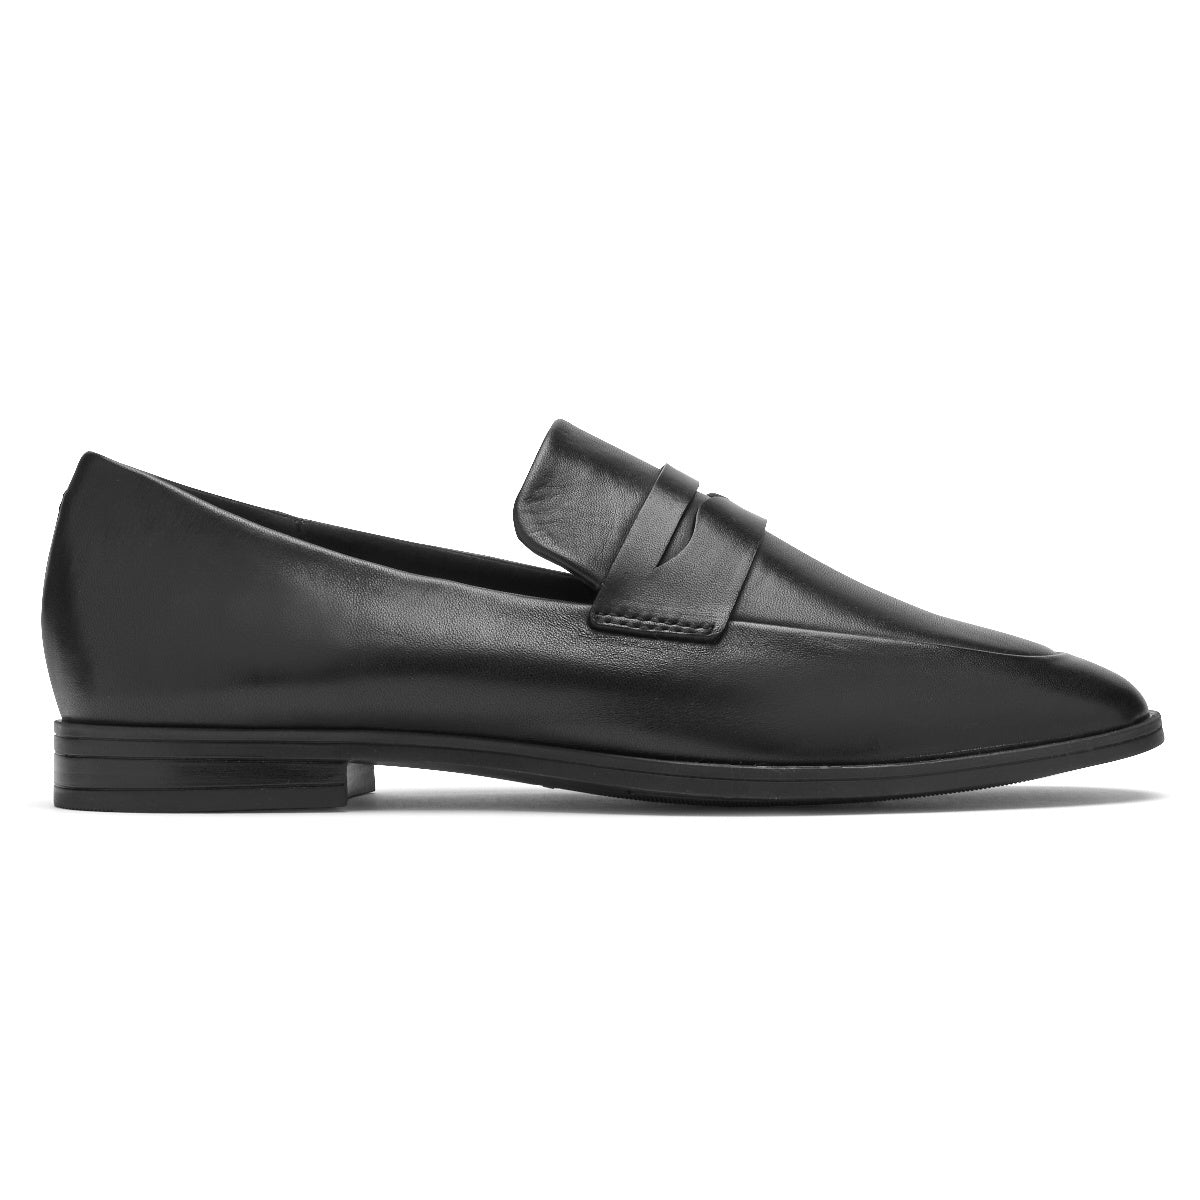 Women's Perpetua Classic Penny Loafer